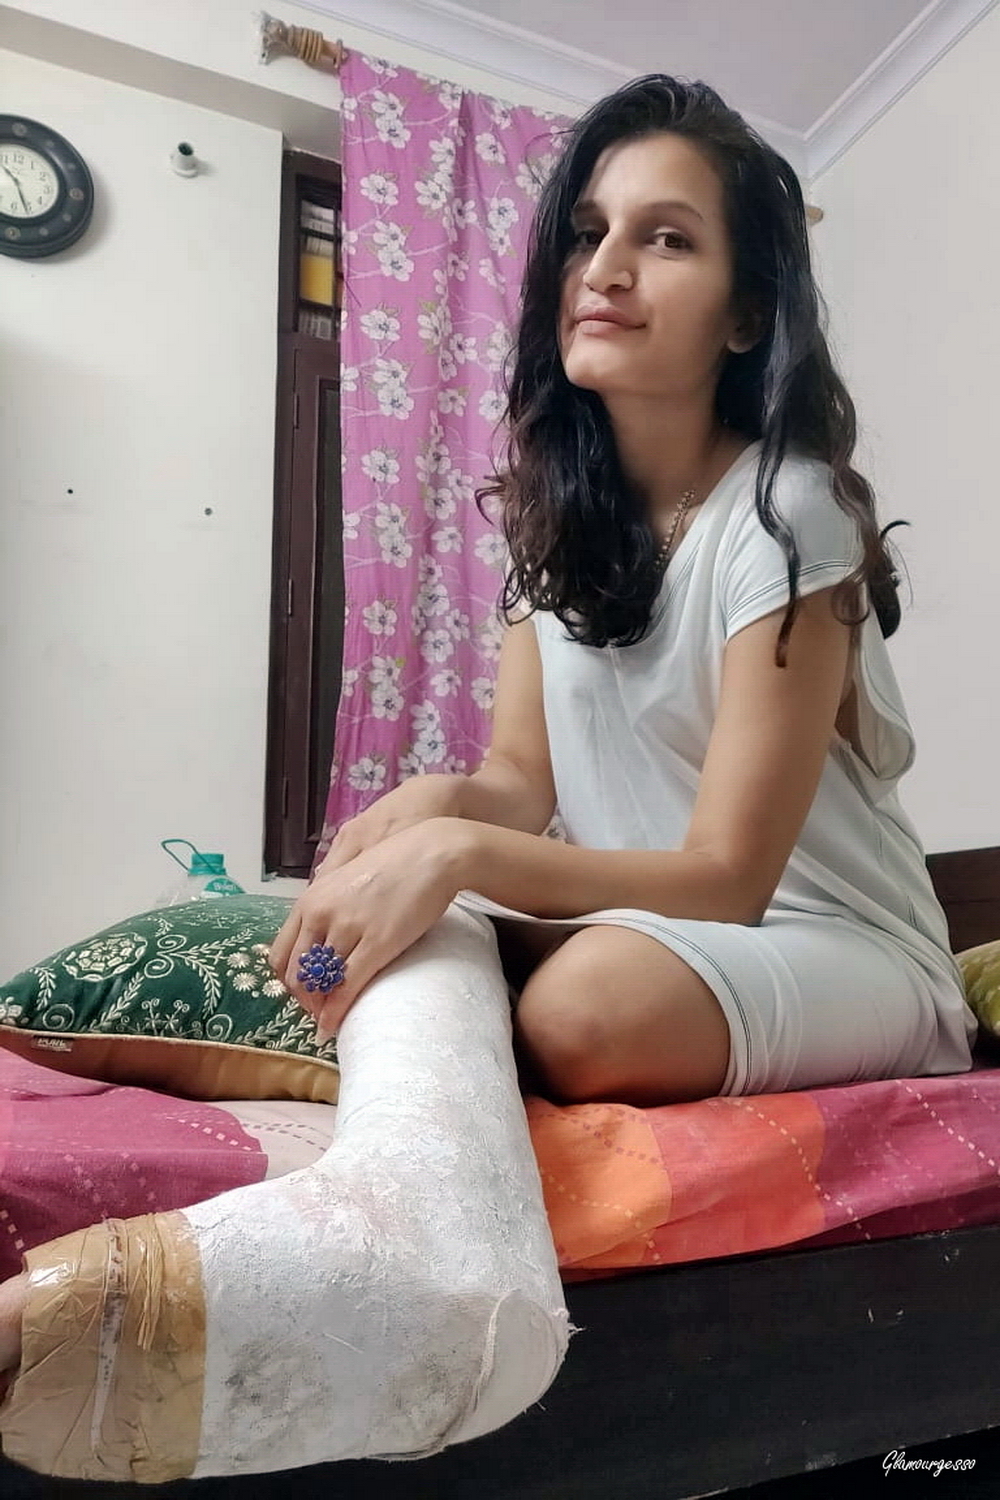 Sameera Medical SLC - PHOTOPACK: dian professional model Sameera wears her Medical Short Leg Cast showing you her 1 month long life on crutches after breaking her left ankle falling with her bike in Delhi in summer 2020.